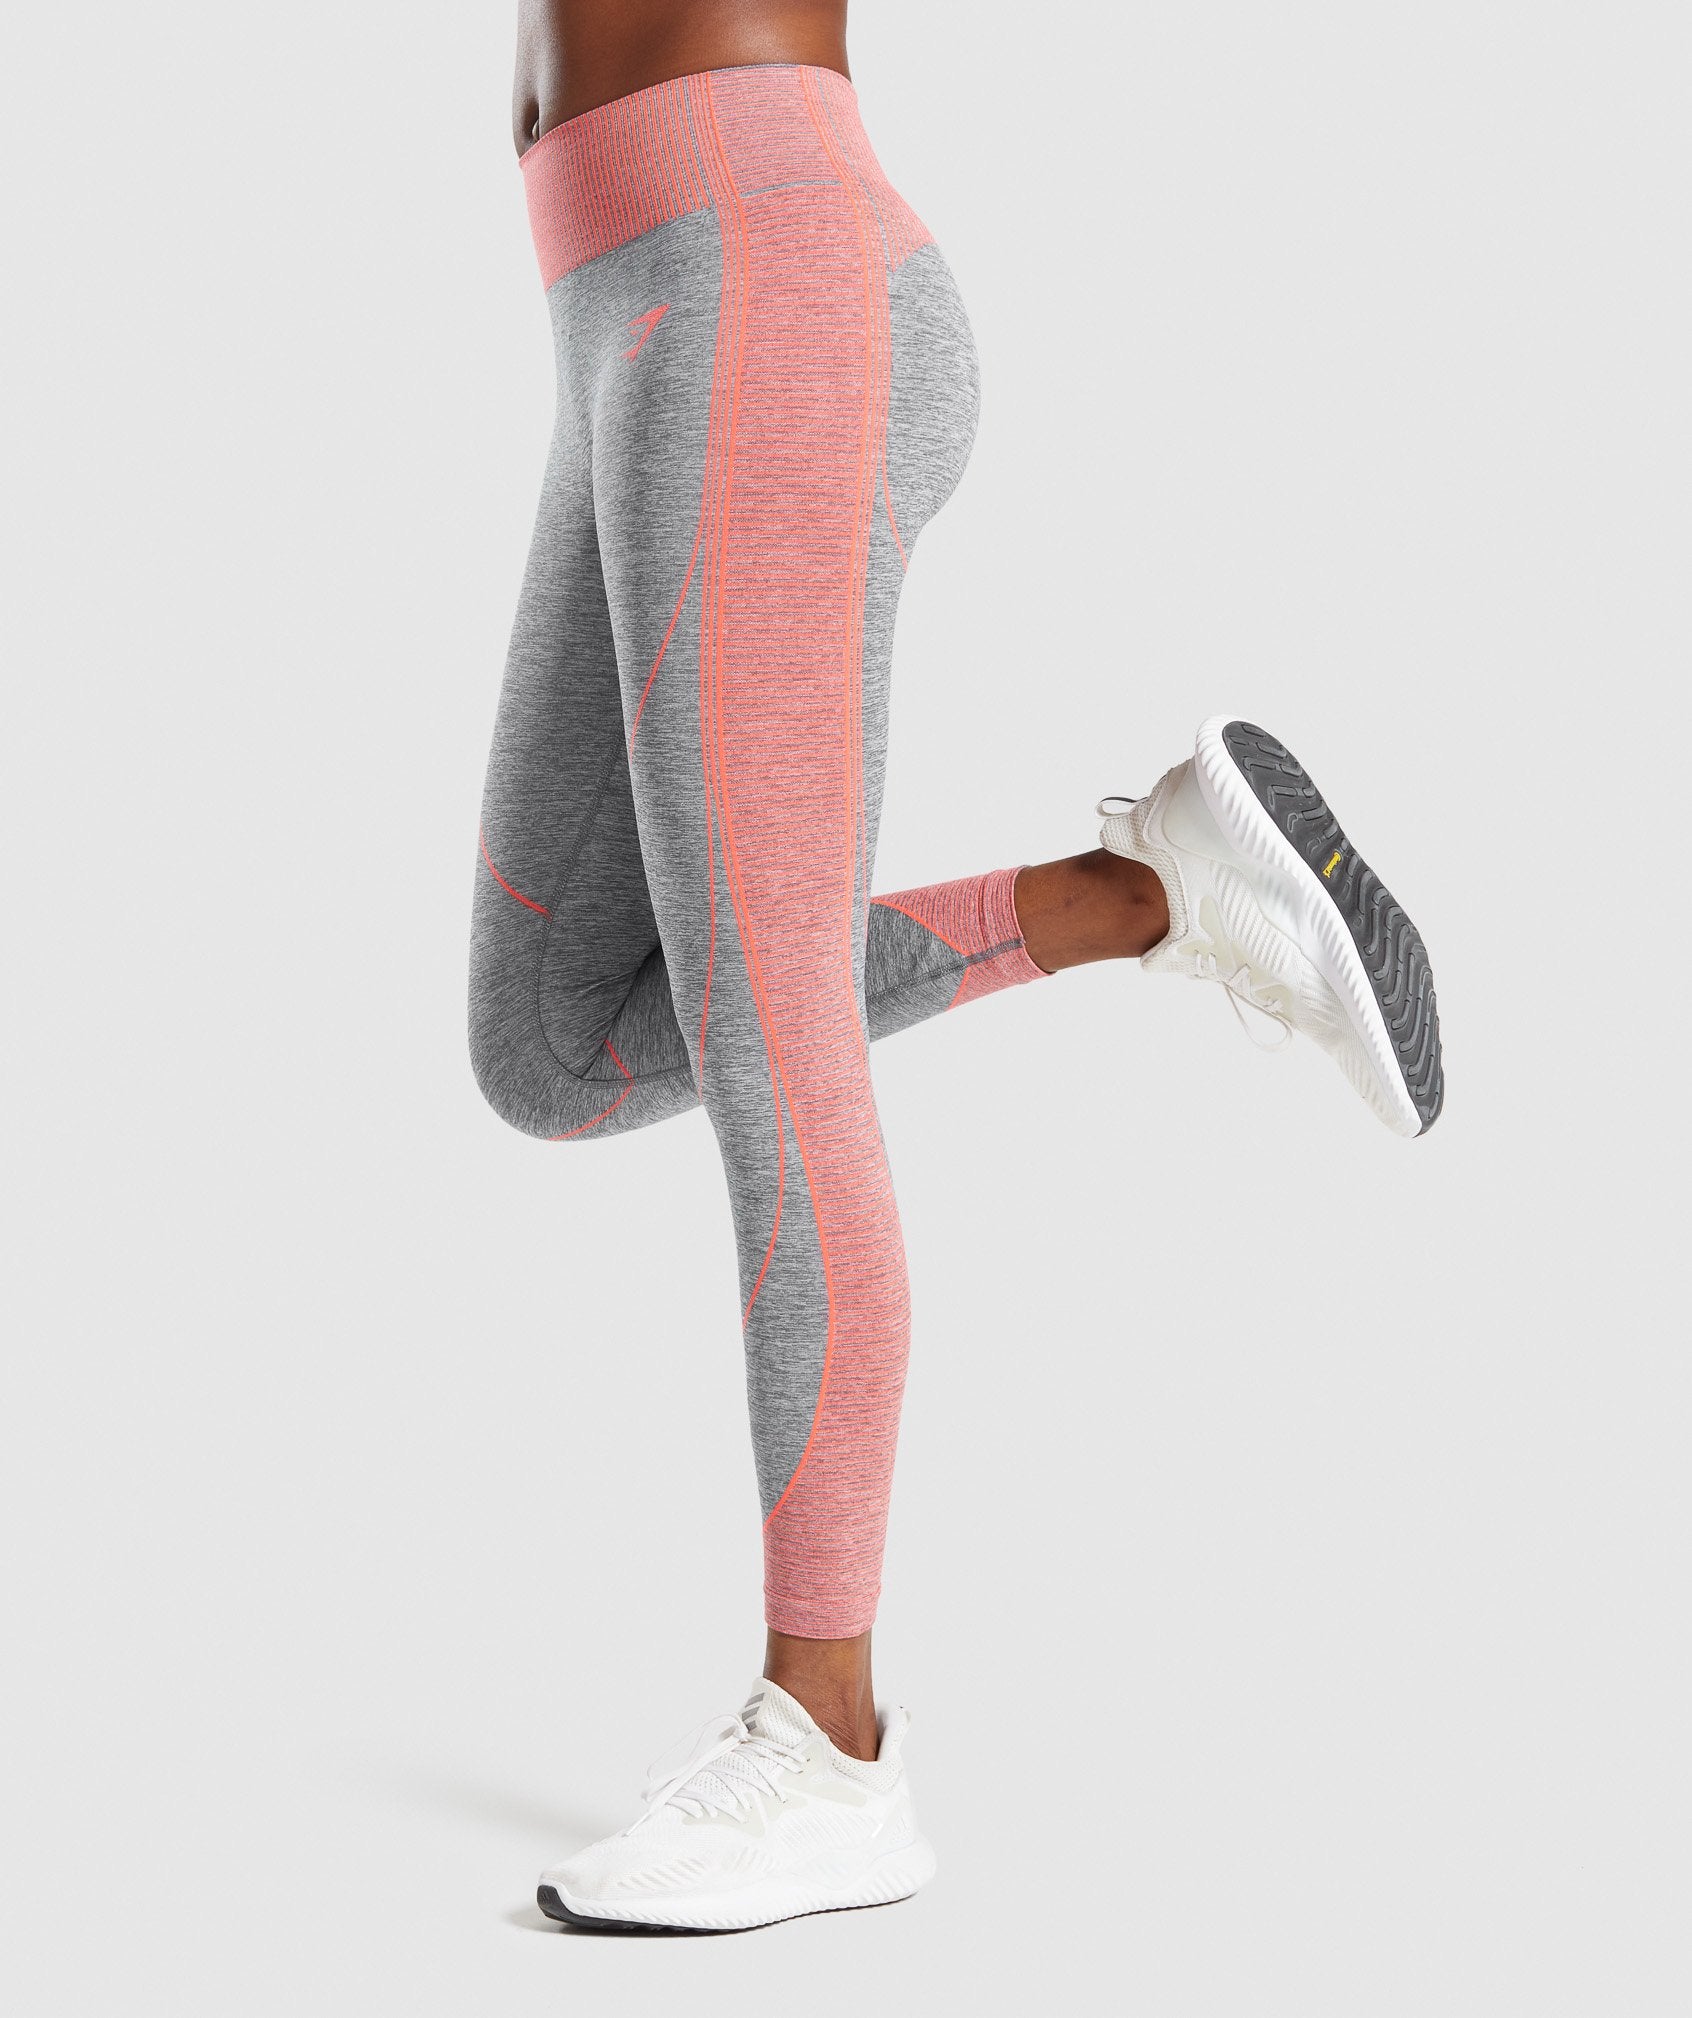 Hyper Amplify Leggings in Charcoal Marl/Coral - view 5